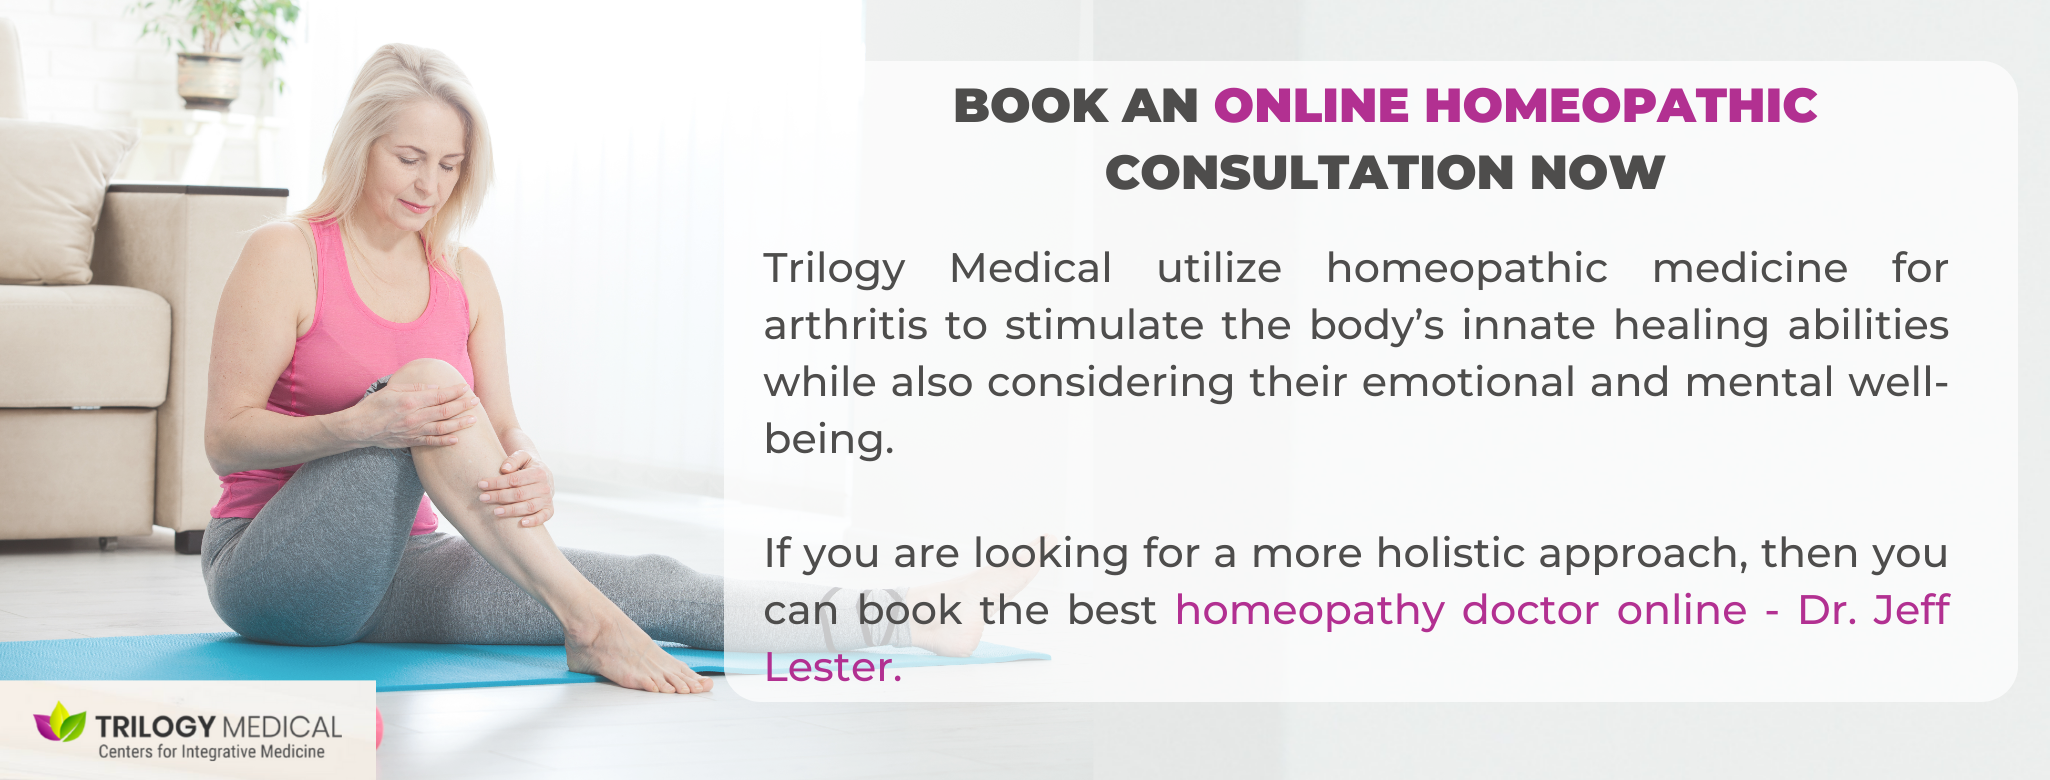 contact our homeopathy doctor online for Homeopathy for Arthritis